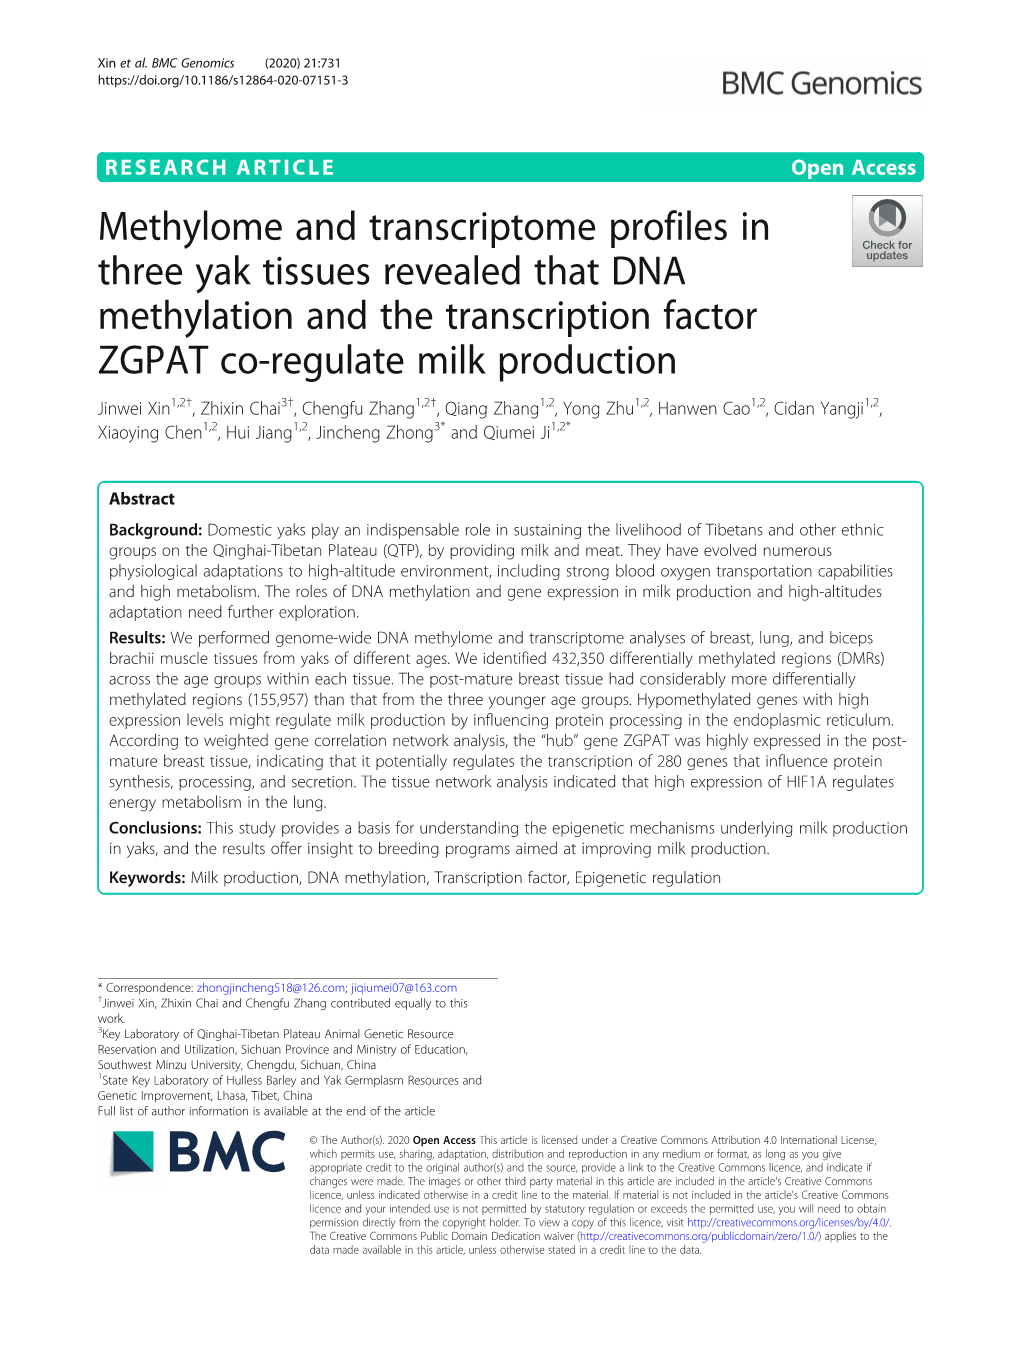 Methylome and Transcriptome Profiles in Three Yak Tissues Revealed That